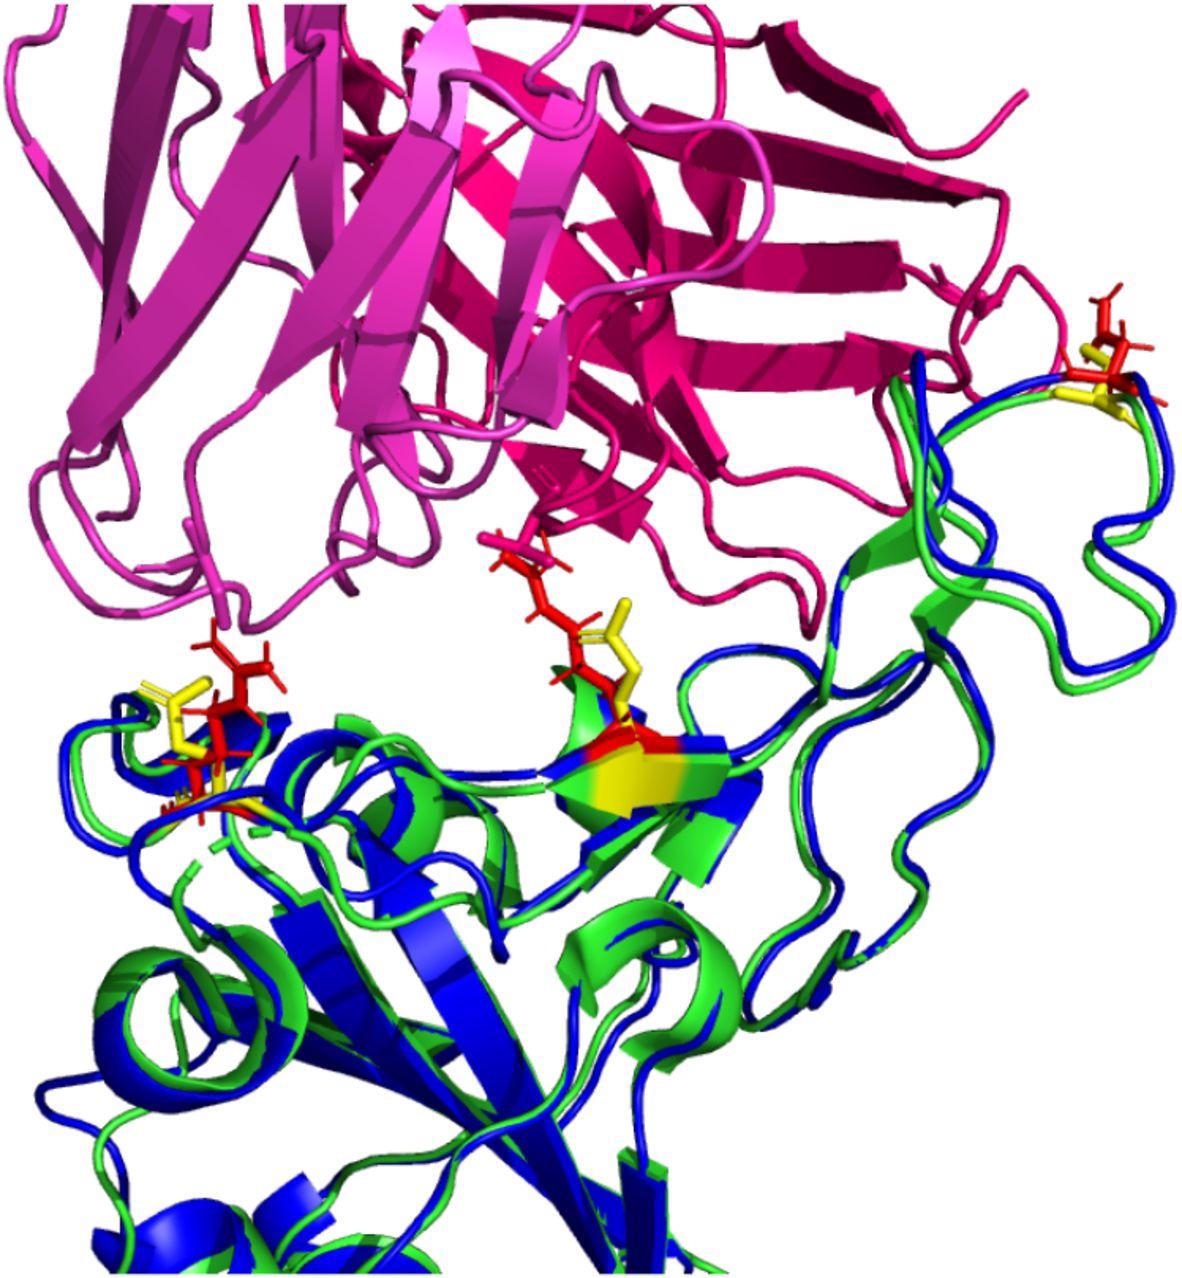 Possible inhibitory mutated RBD residues in Omicron (B.1.1.529) (structure shown in blue with mutated residues of interest shown in red). Note: the reference RDB structure (PDB: 6XC2 is shown in green with equivalent position residues highlighted in yellow. CC12.1 antibody Fab (from PDB 6XC2) is shown in magenta / pink.